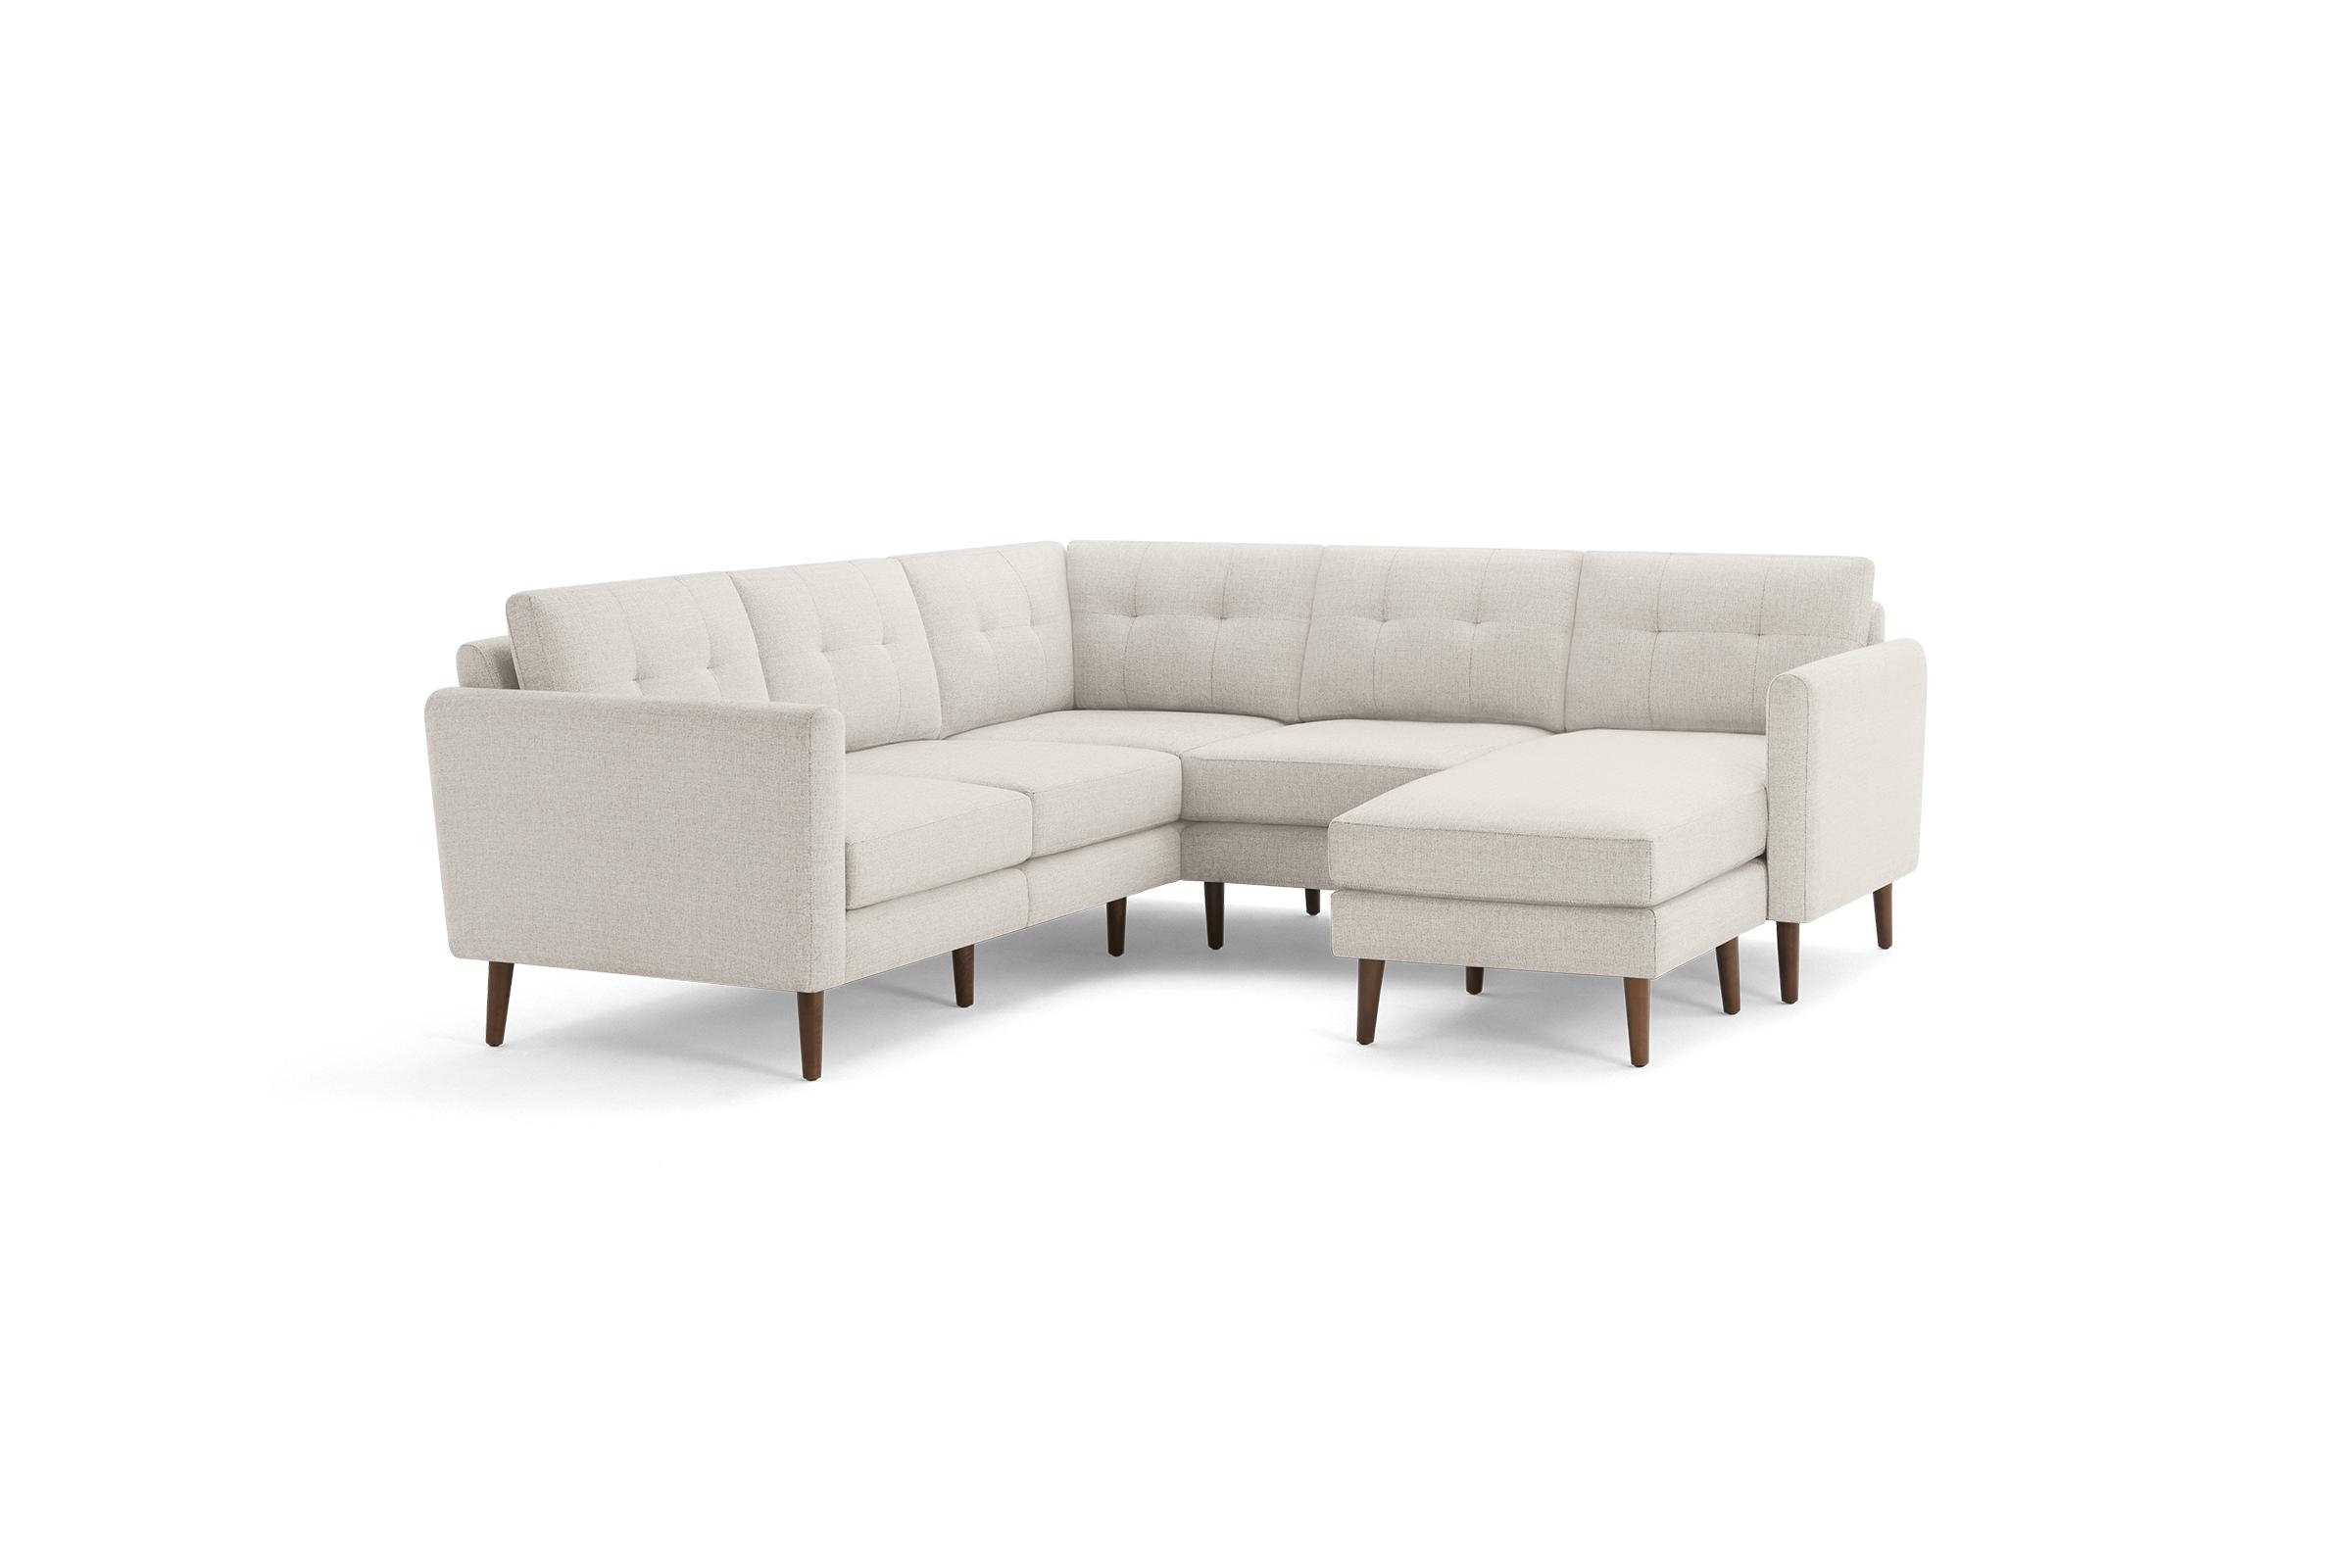 Nomad 5-Seat Corner Sectional with Chaise in Ivory, Leg Finish: WalnutLegs - Image 0